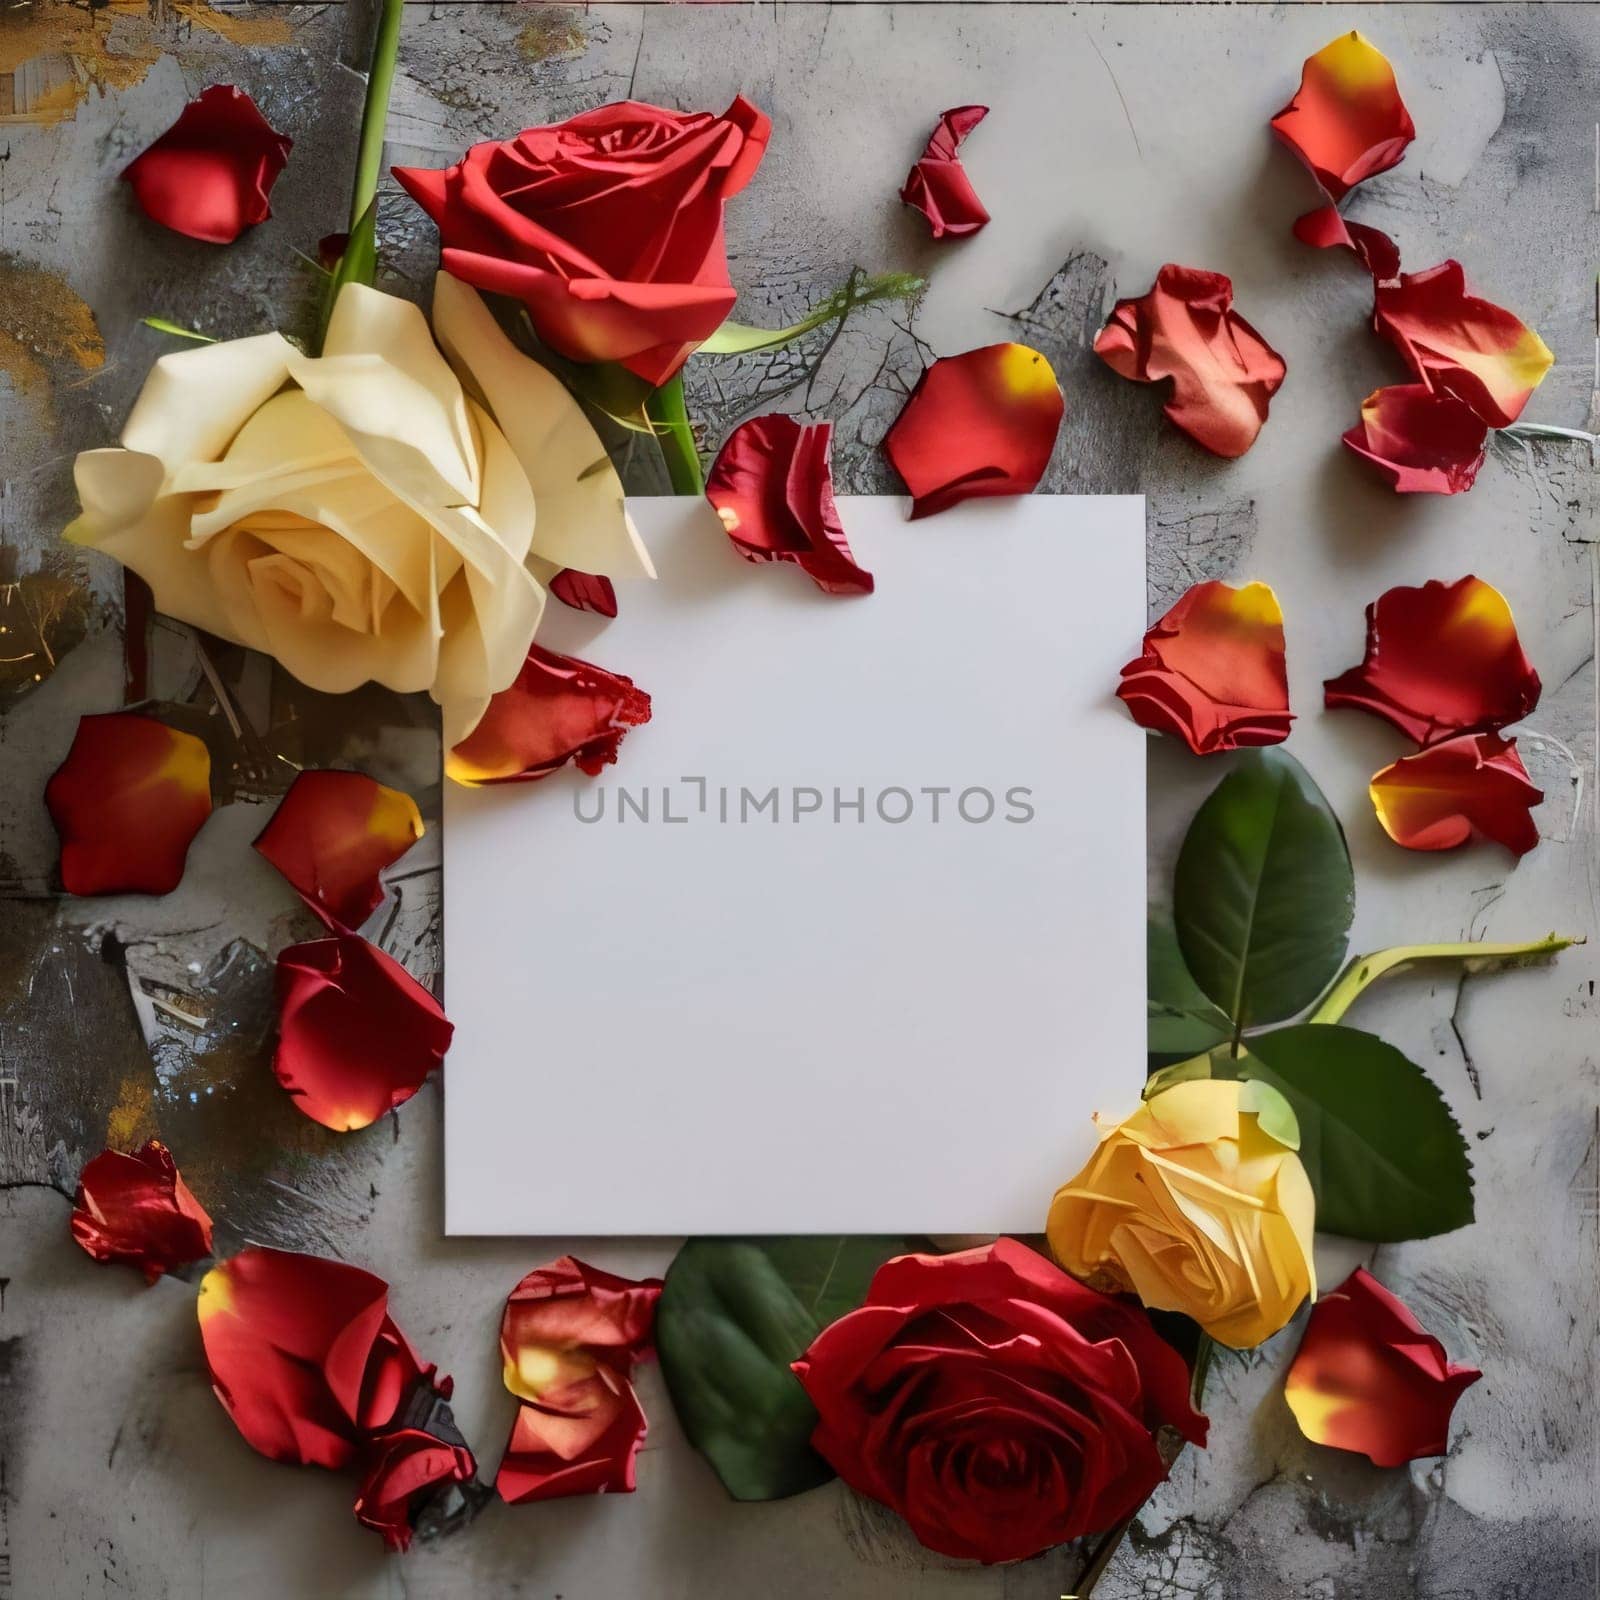 White blank sheet on marble around scattered red and white rose petals. Places for their own content. Flowering flowers, a symbol of spring, new life. by ThemesS